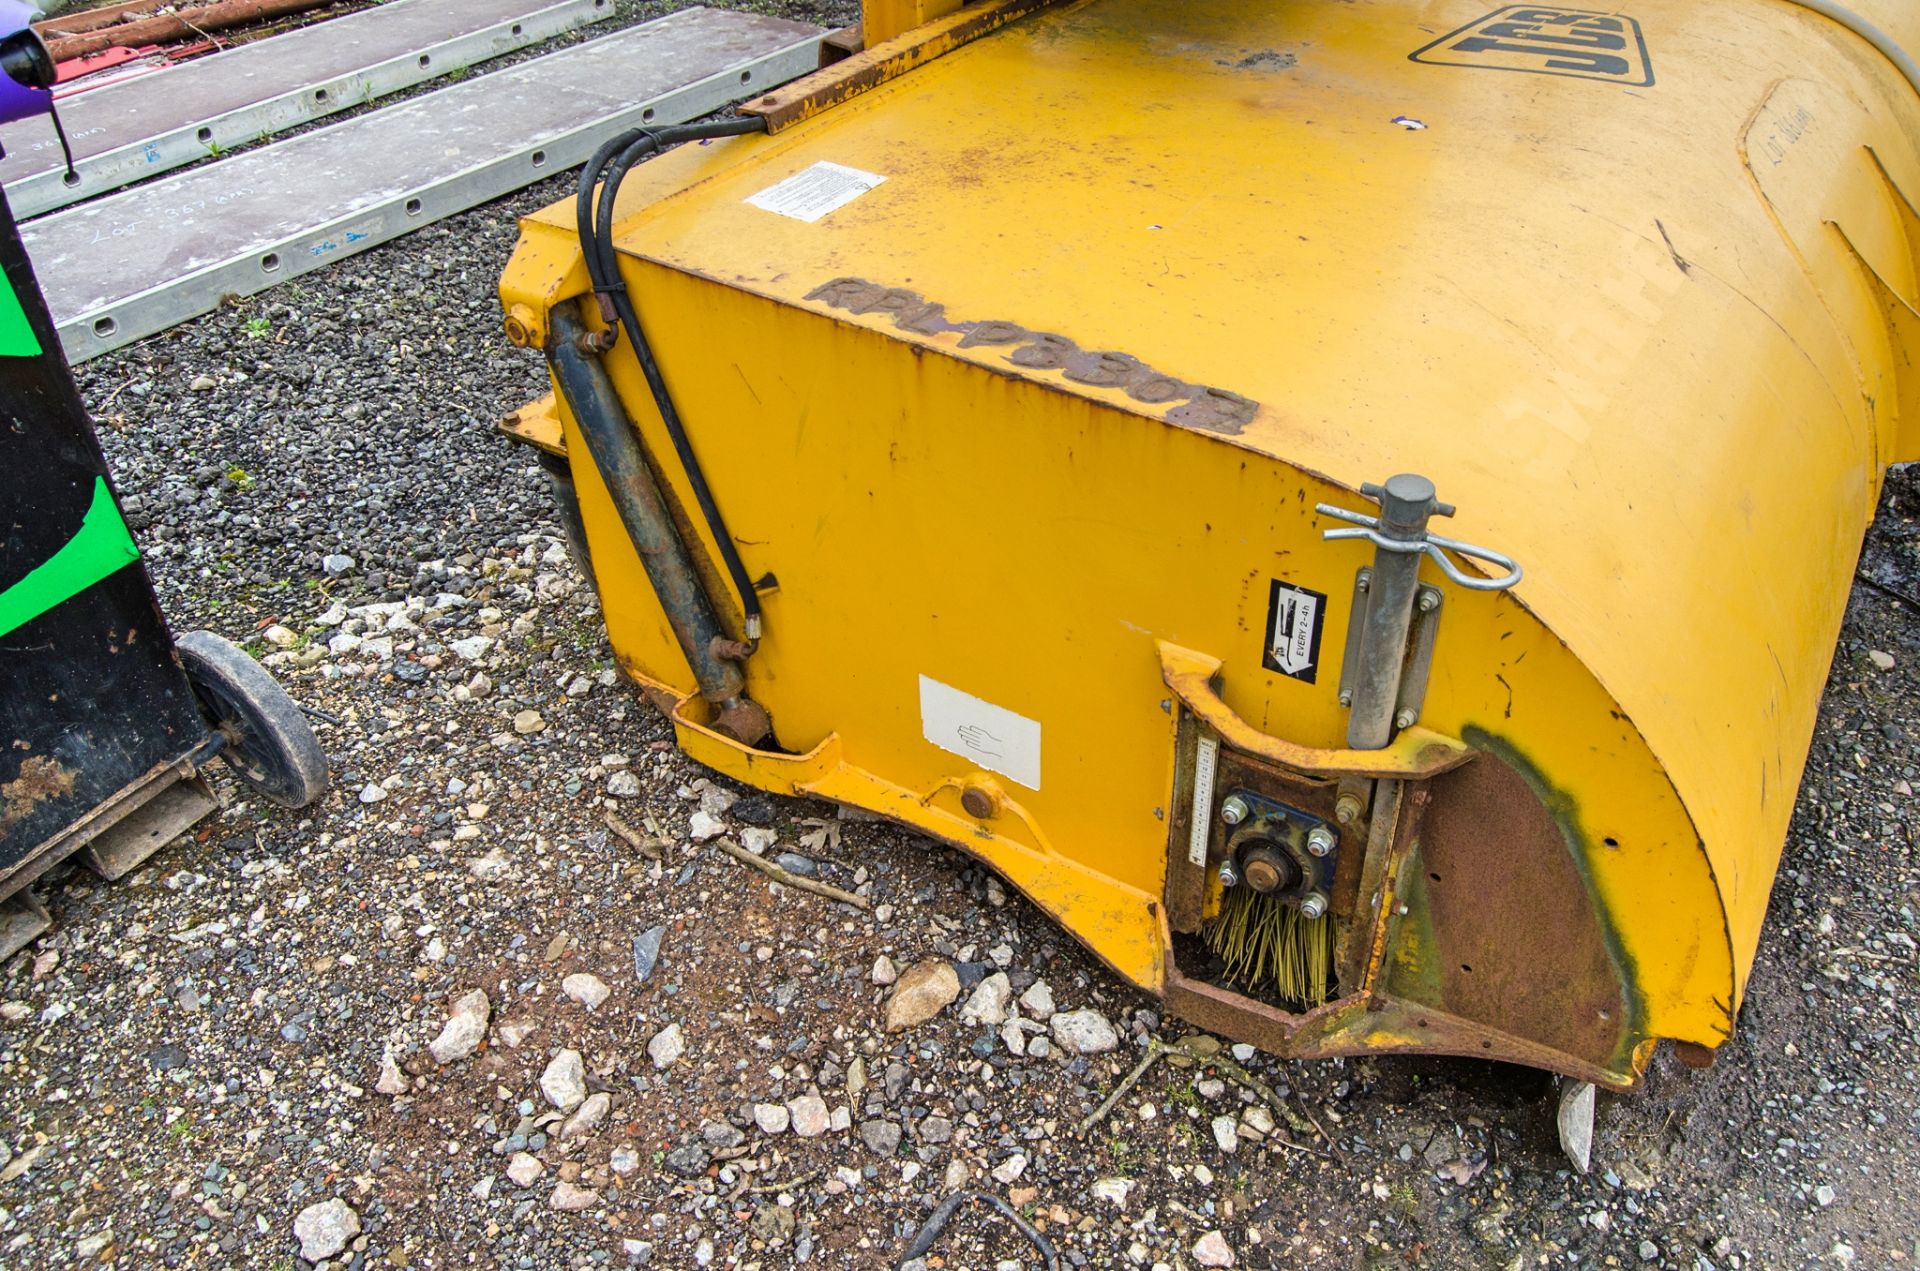 JCB 500 hydraulic sweeper attachment Year: 2005 RPLP3307 ** No VAT on hammer but VAT will be charged - Image 4 of 4